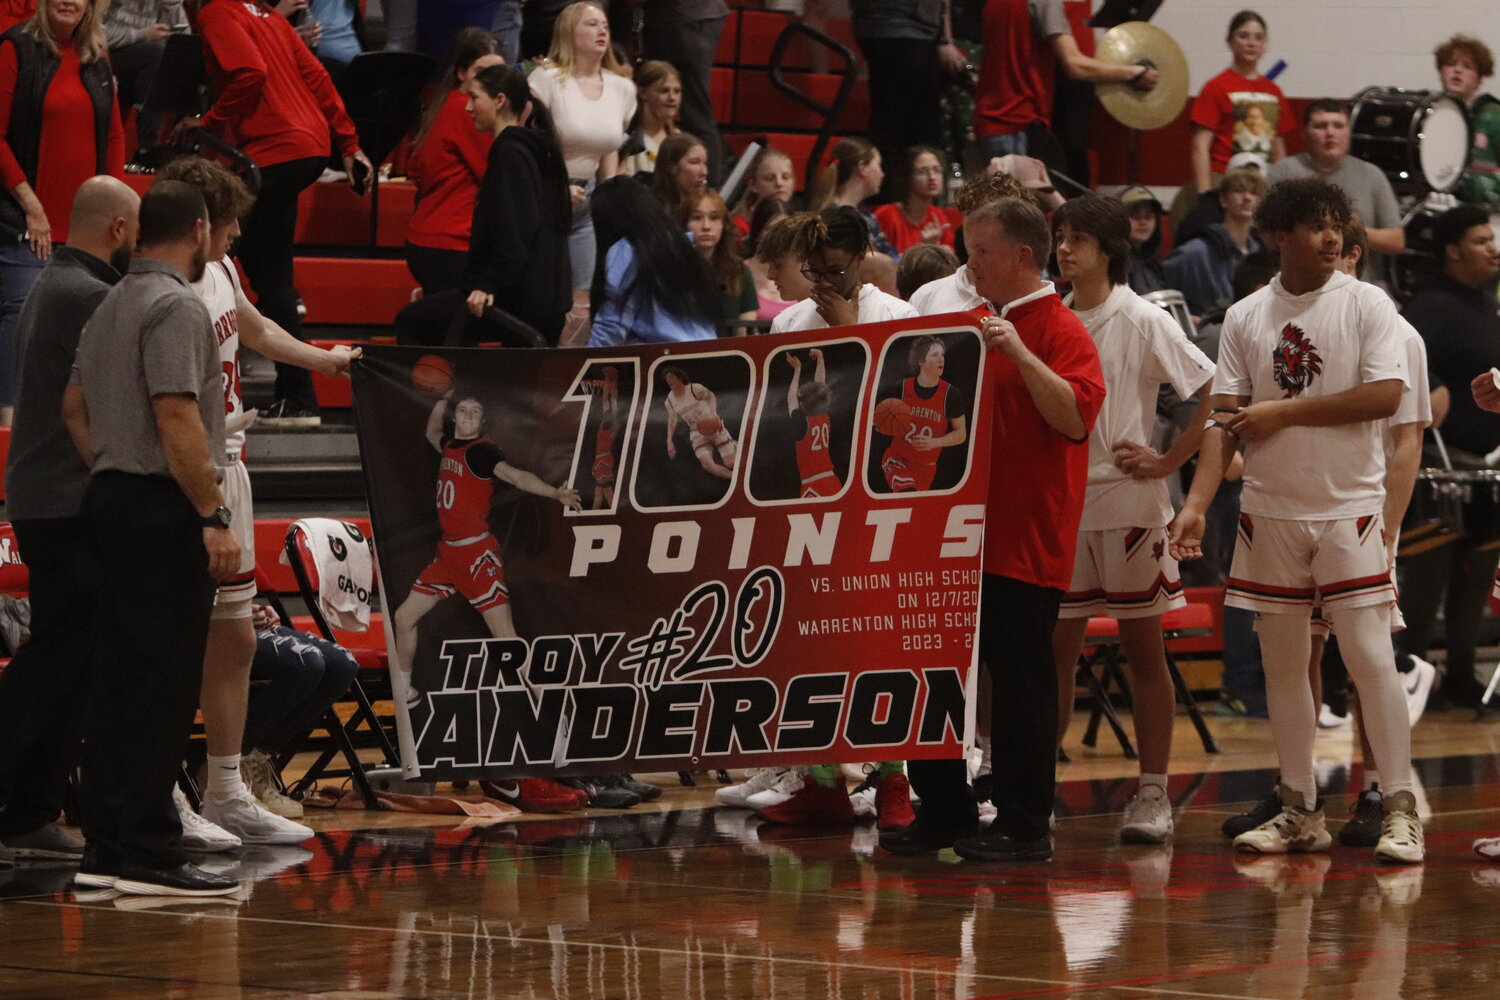 Warrenton senior Troy Anderson (third from left) was recognized before Warrenton’s home game Friday night for reaching 1,000 career points scored. Anderson reached the milestone Dec. 7 in a road game at Union High School.